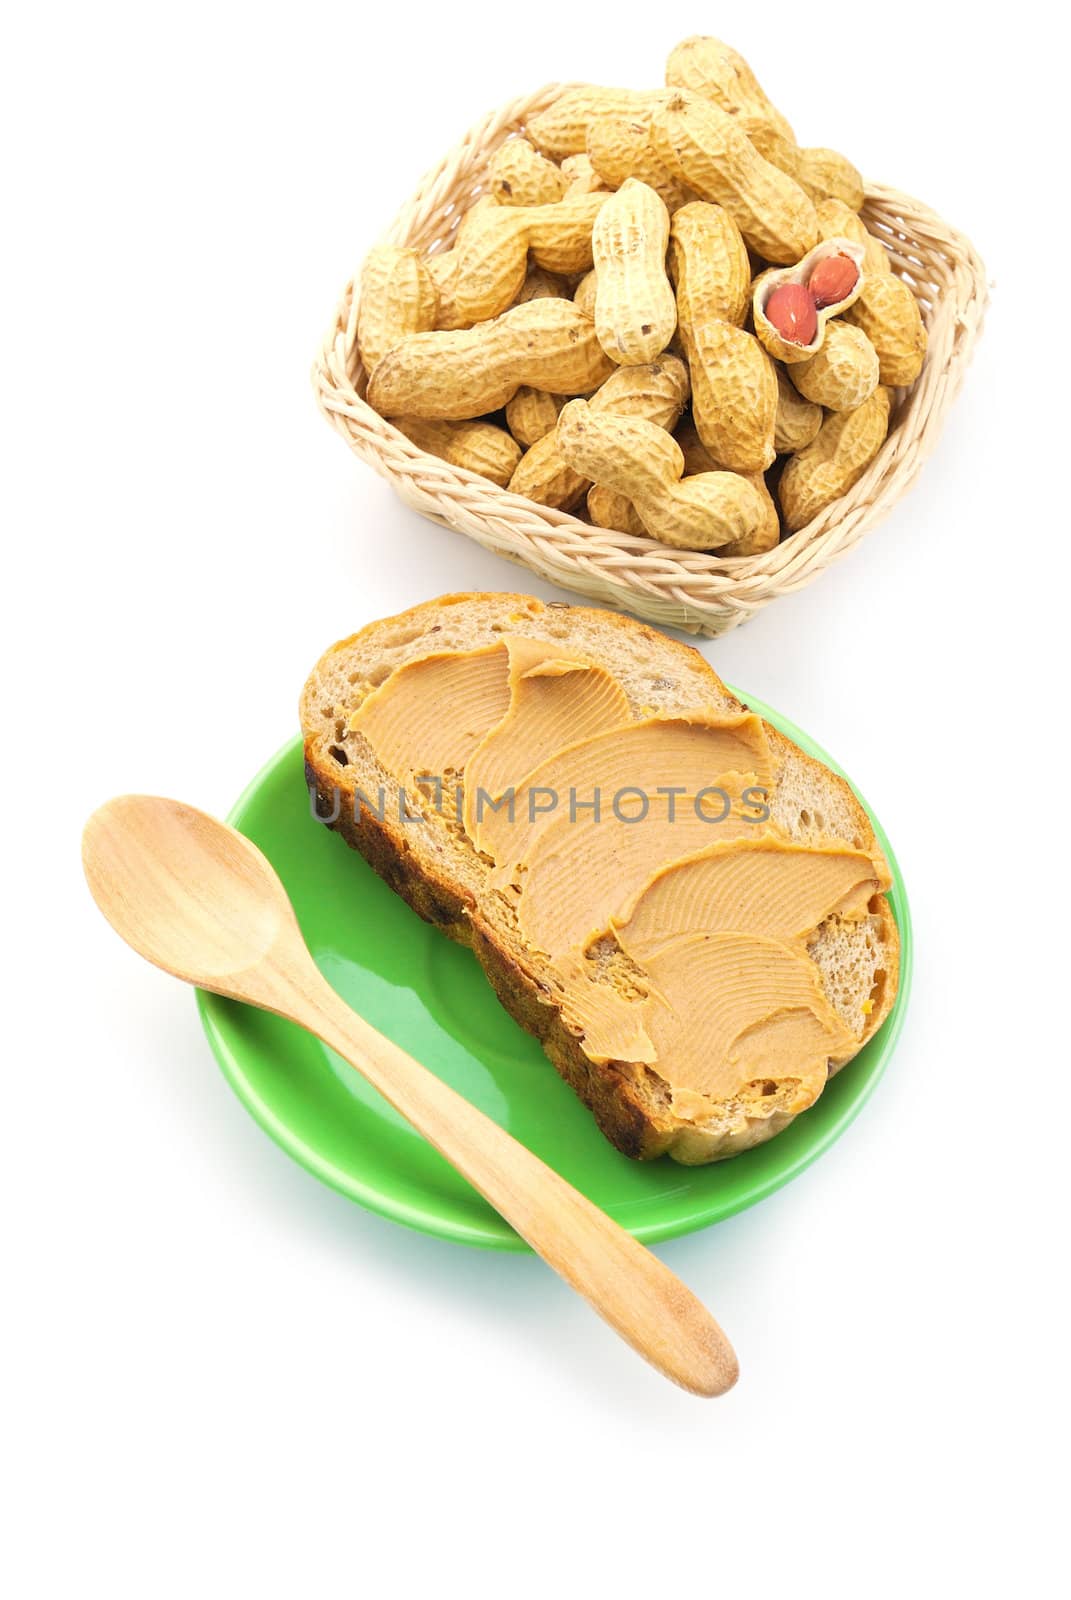 Peanut butter with bread